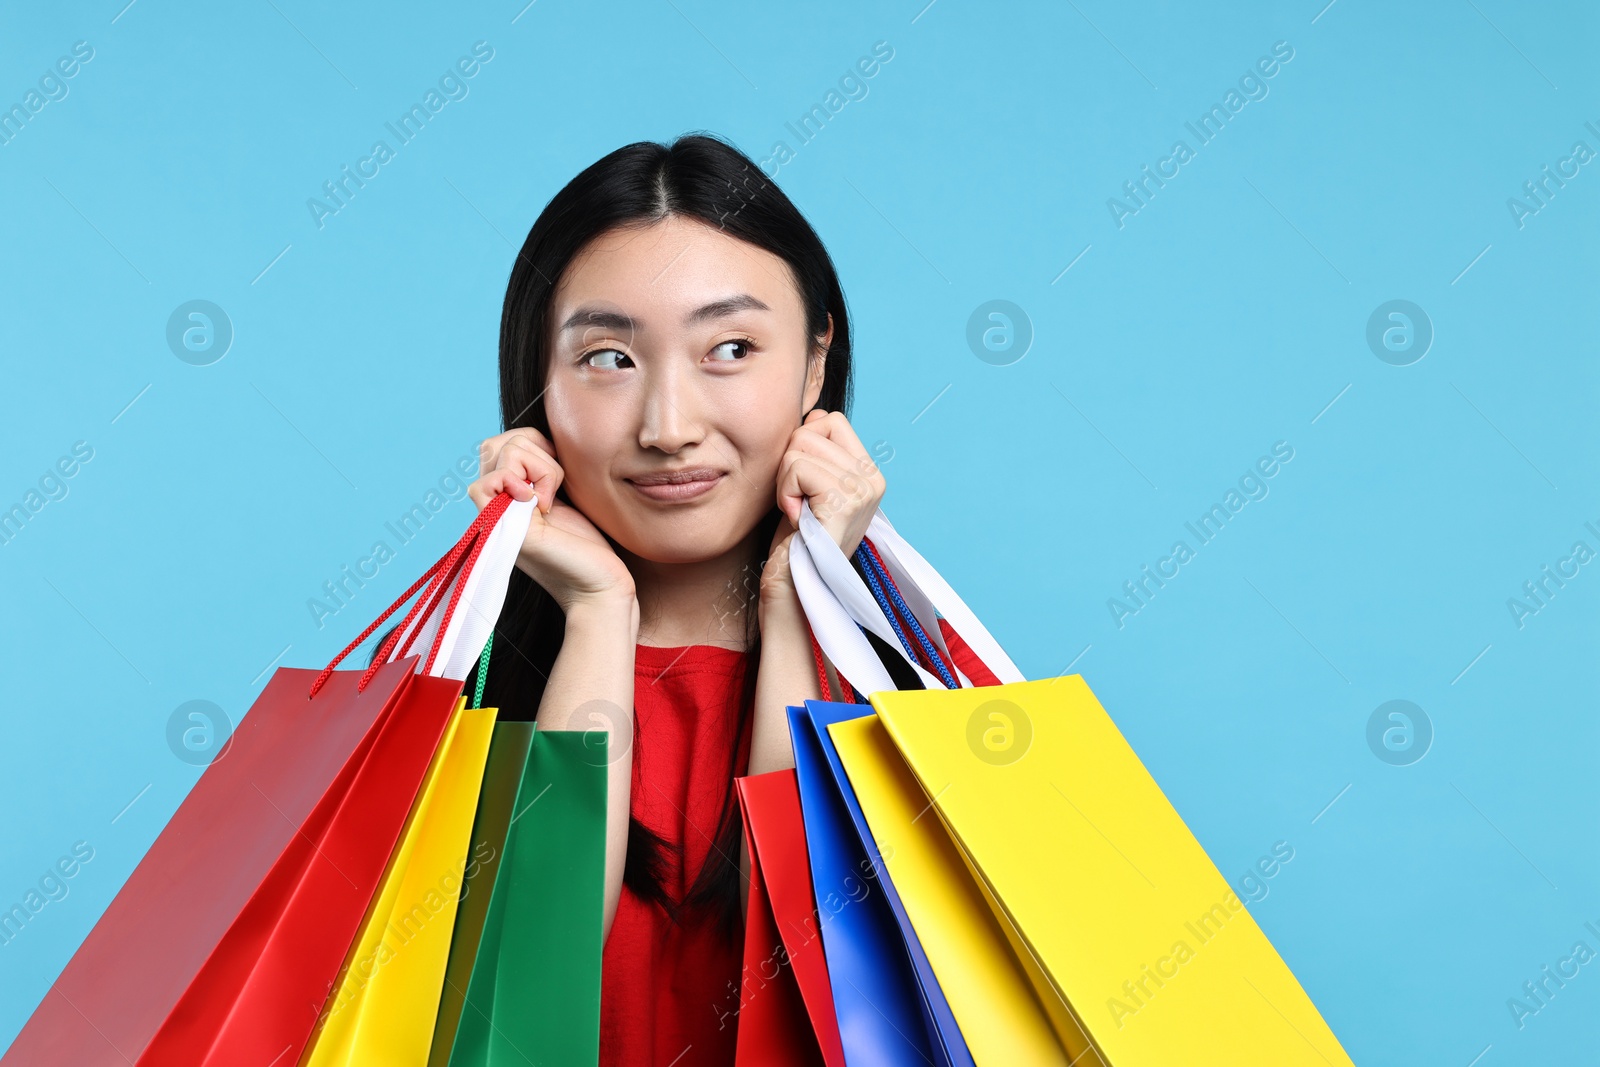 Photo of Happy woman with shopping bags on light blue background. Space for text